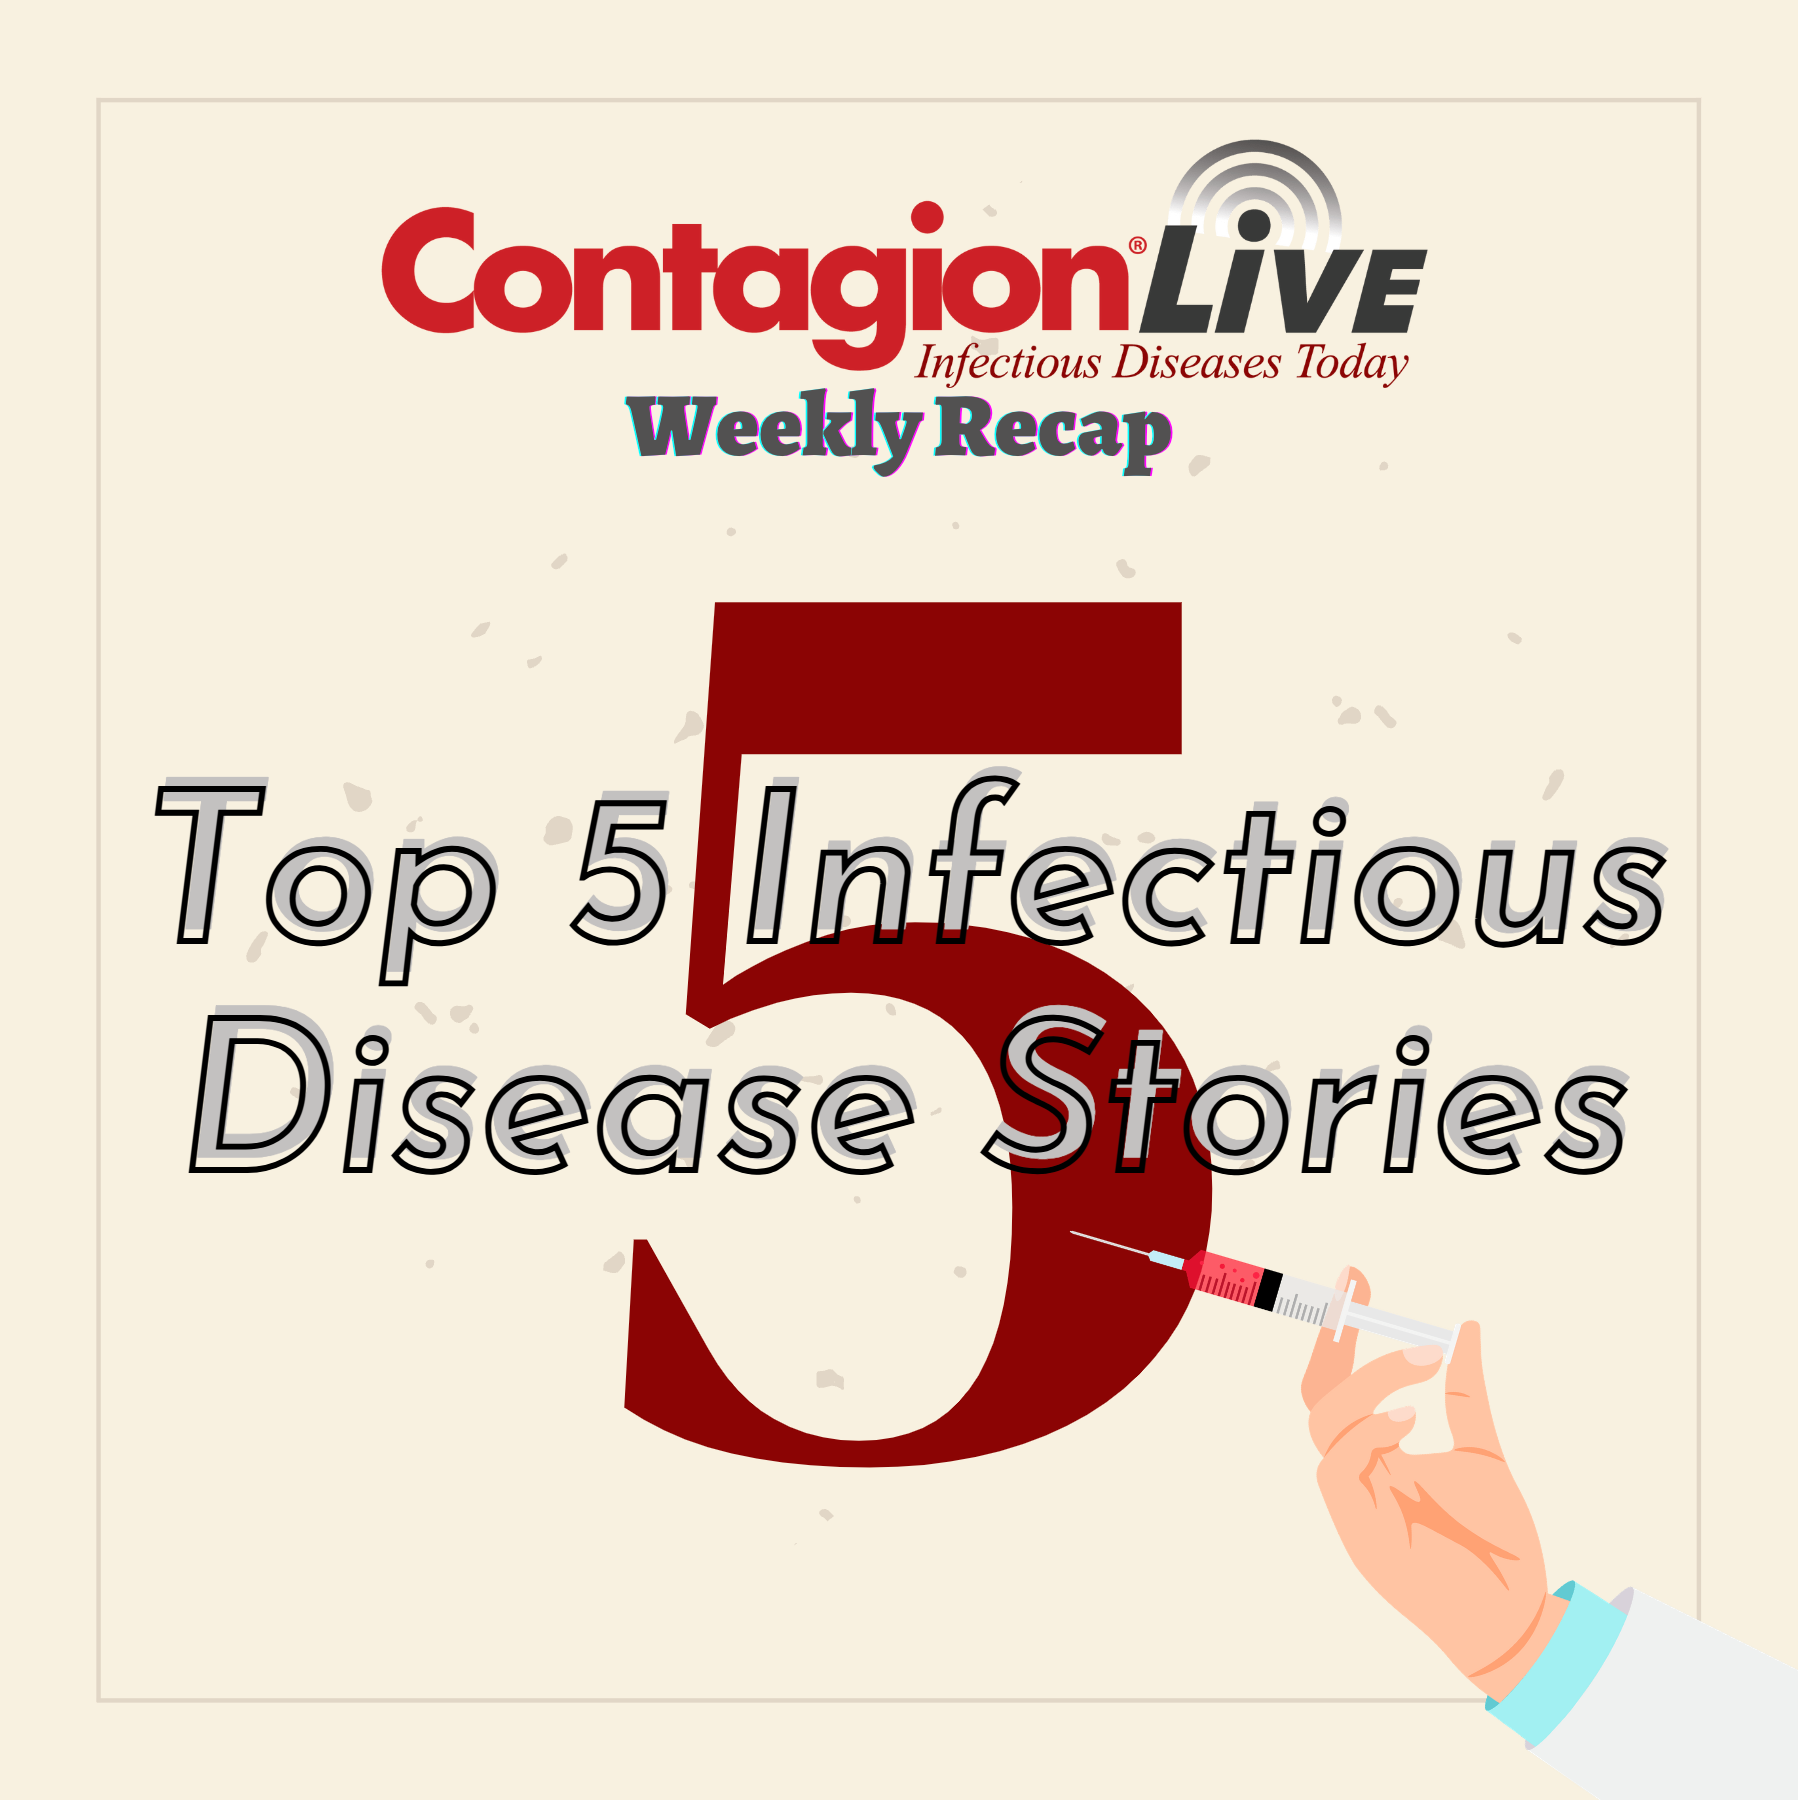 This Week, Recapped: The Top 5 Infectious Disease Stories